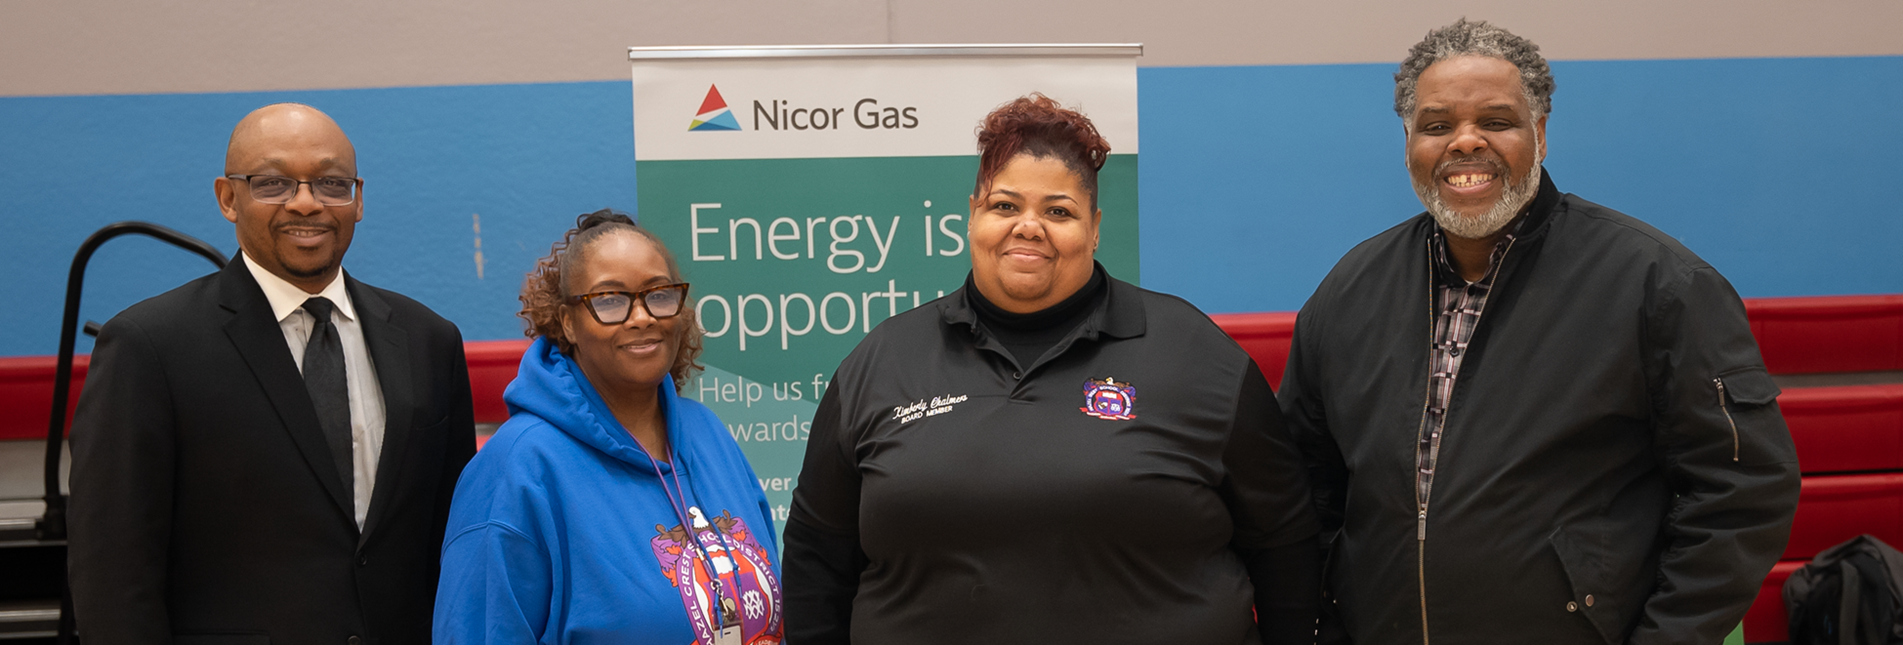 Nicor Energy Resource Fair held at Jesse White Learning Academy